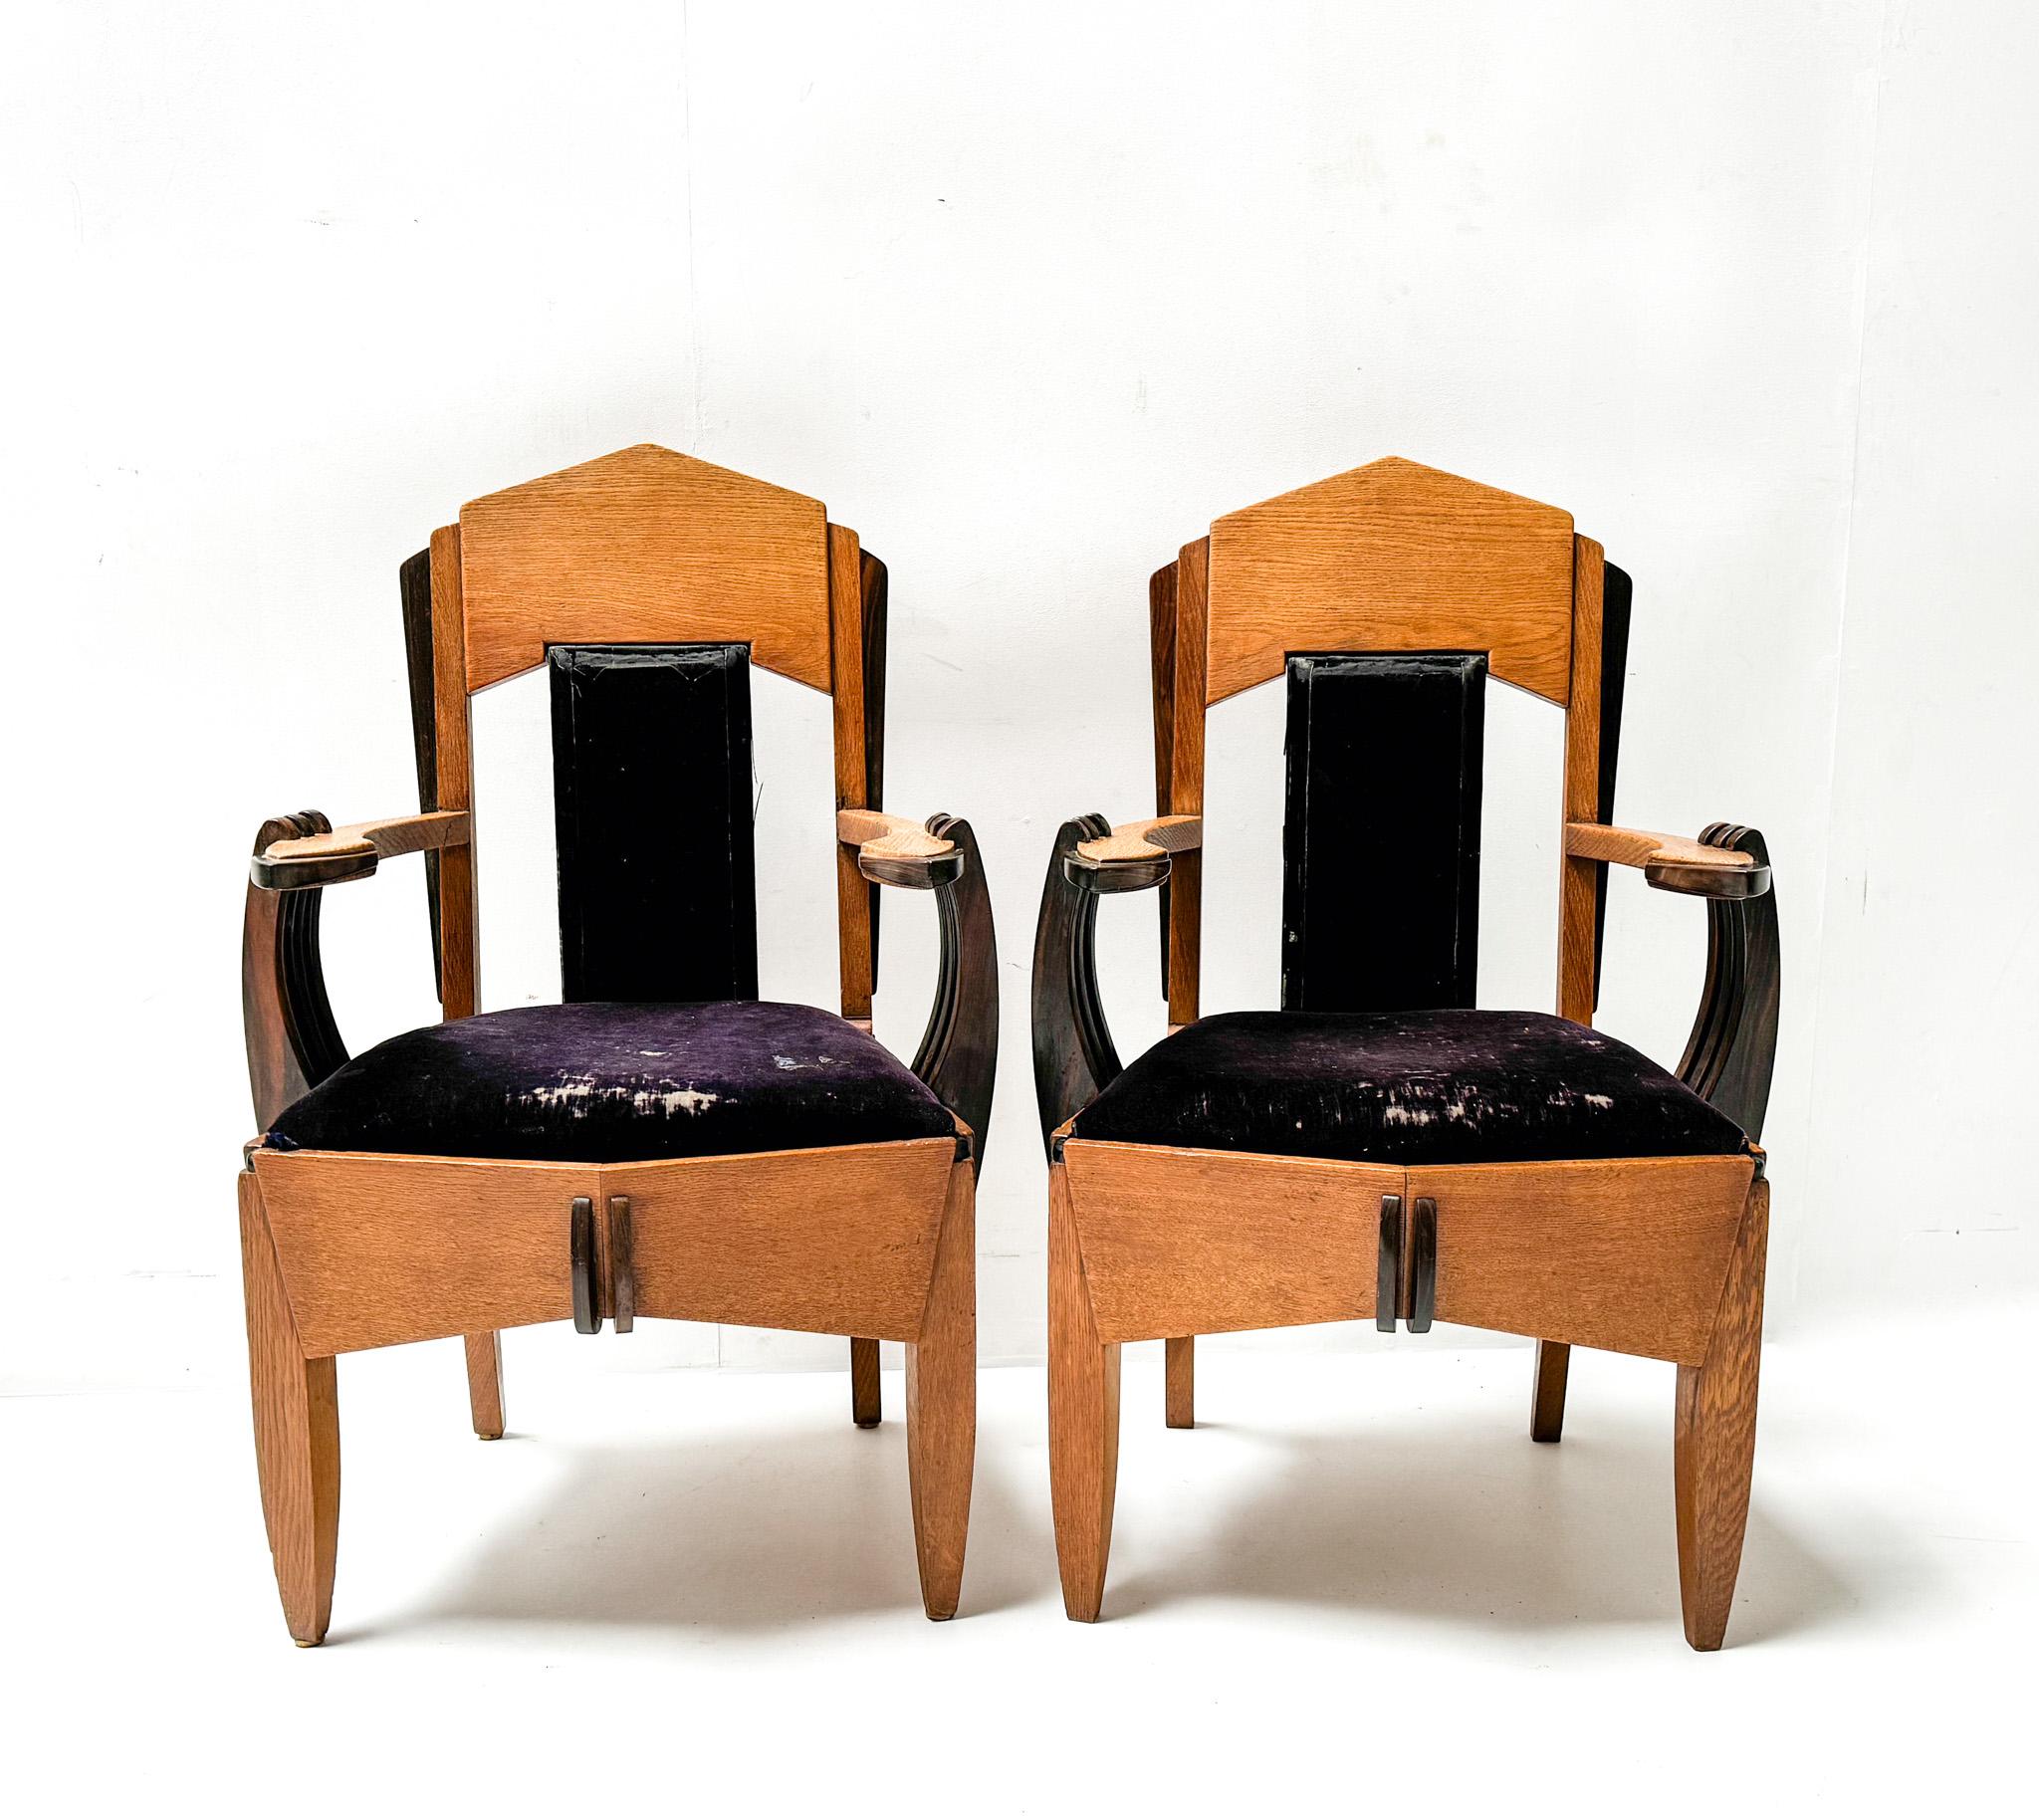 Magnificent and ultra rare pair of Art Deco Amsterdamse School armchairs.
Design by Hildo Krop.
Striking Dutch design from the 1920s.
Solid oak frames with original solid macassar ebony elements.
The two backrests and two seats still have the